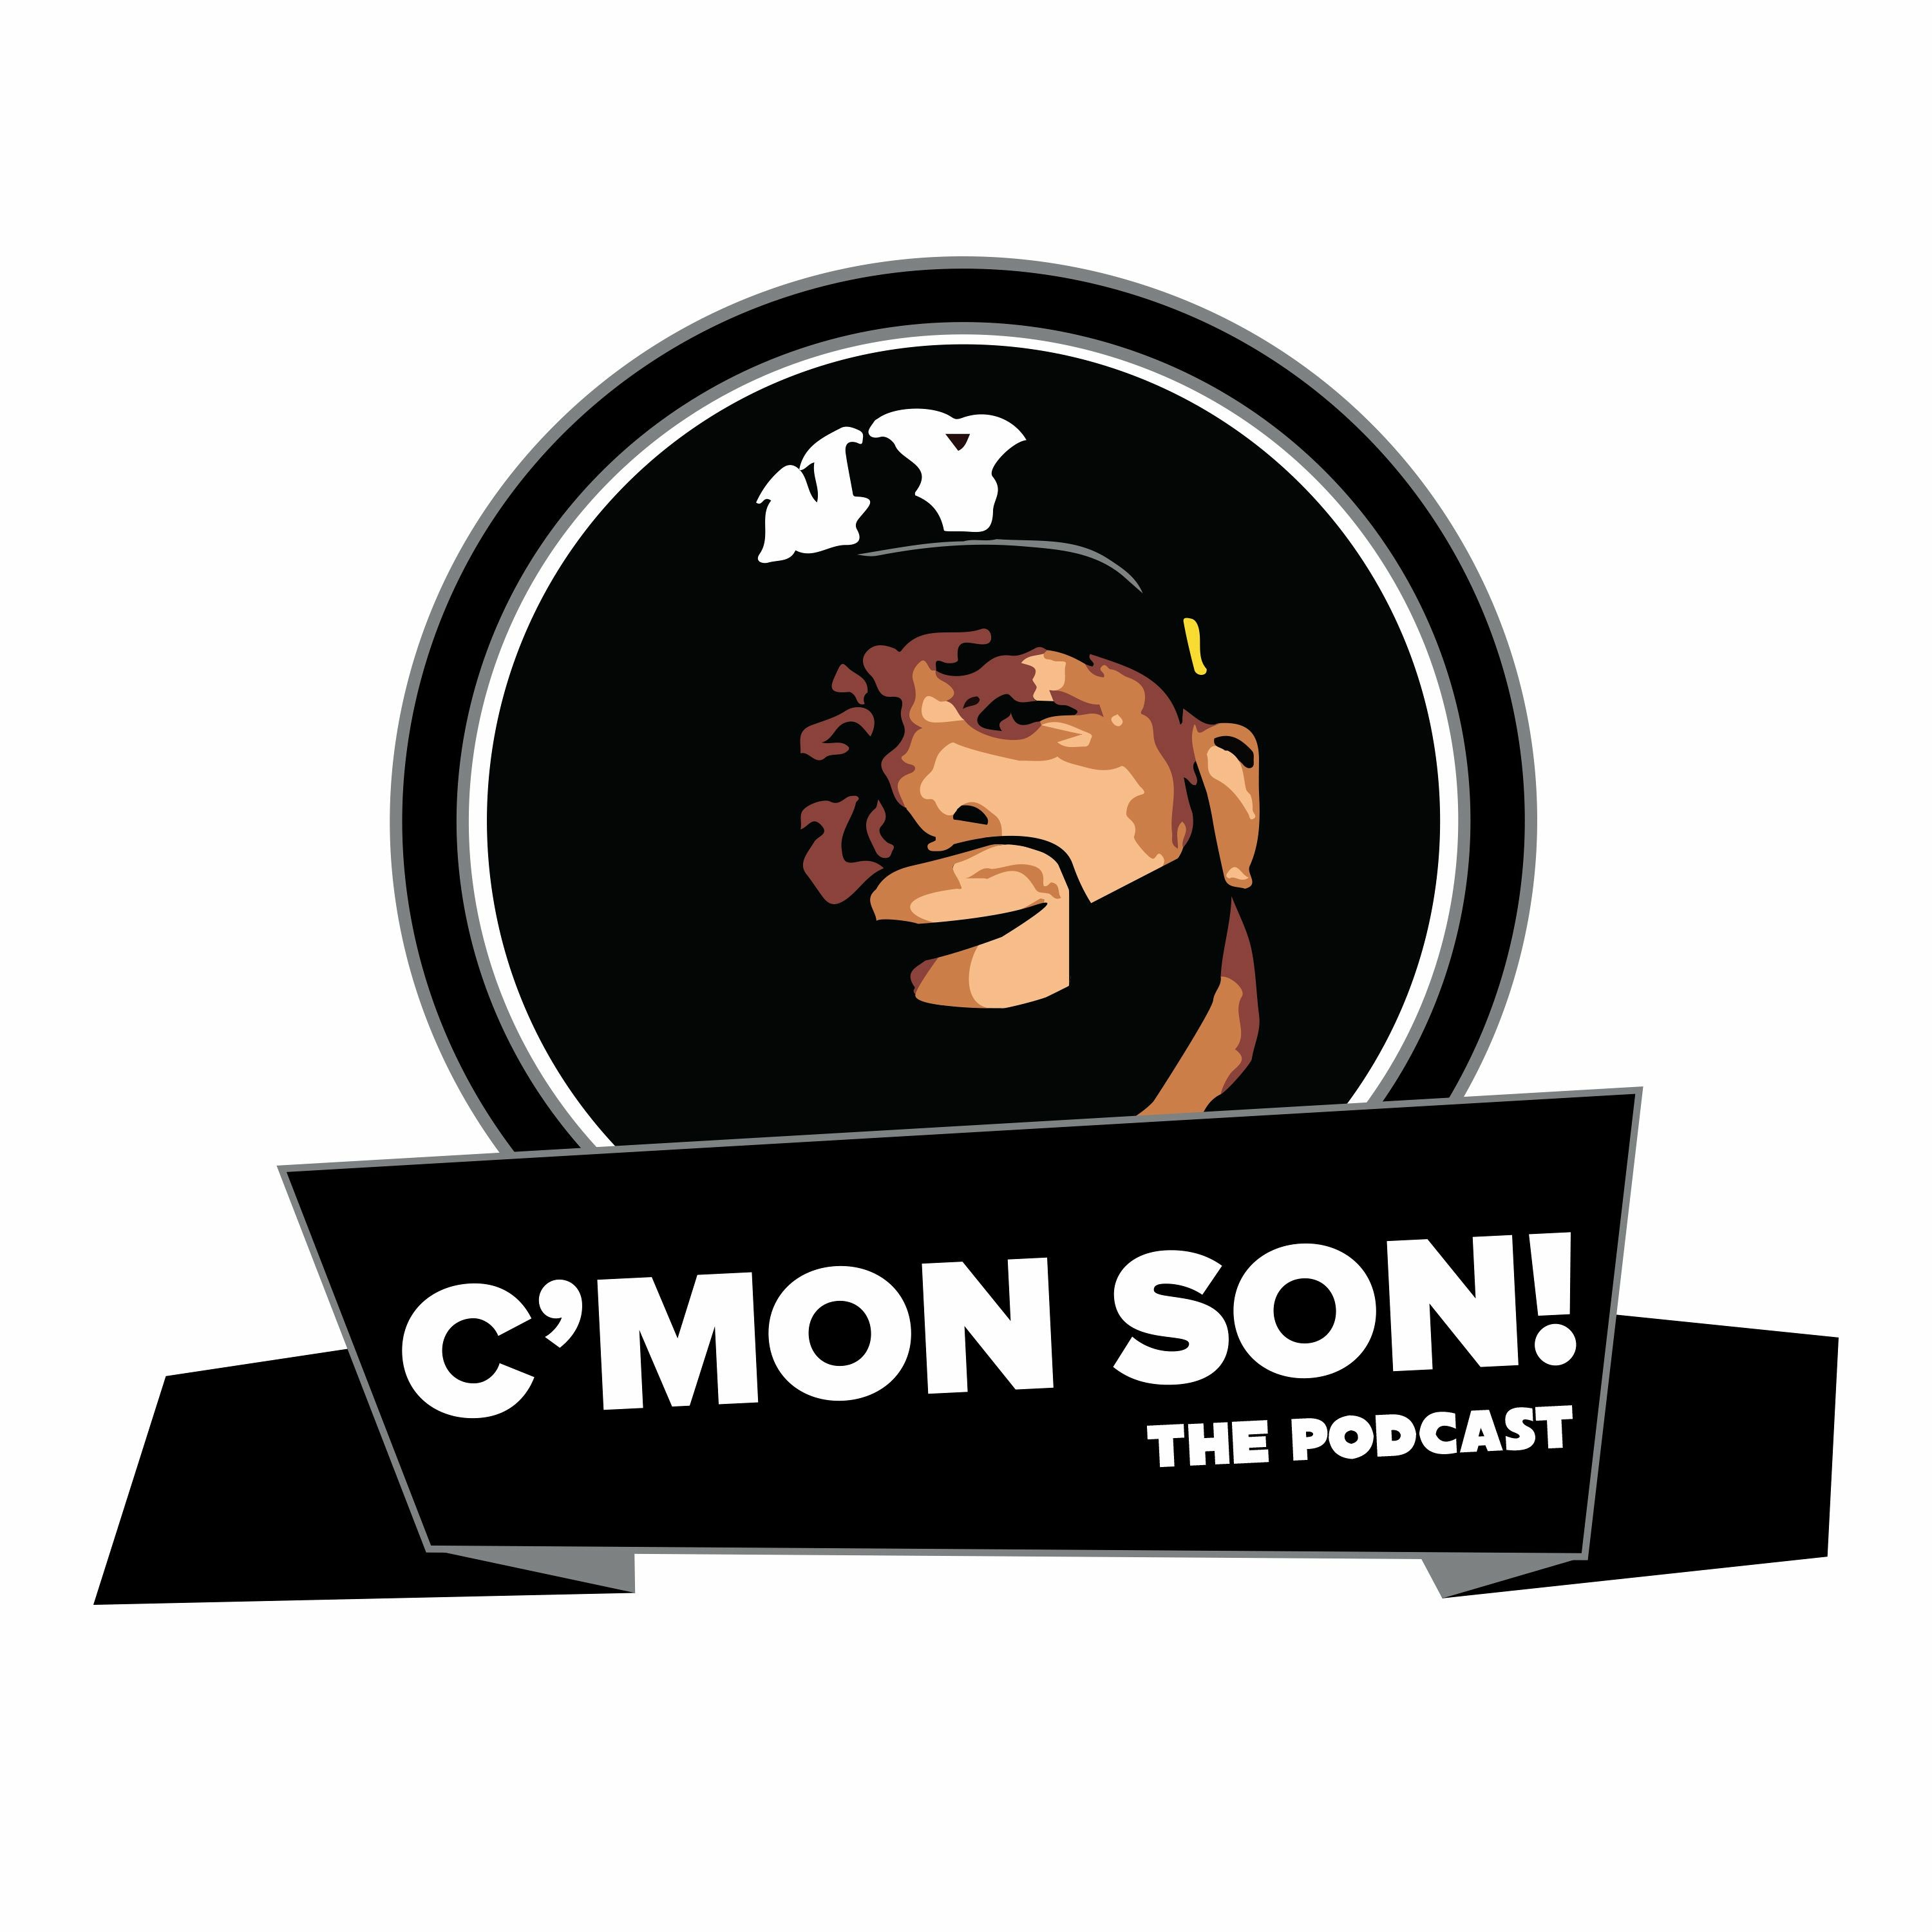 C'Mon Son! The Podcast Series #3 Episode #27 The Swinger Lifestyle